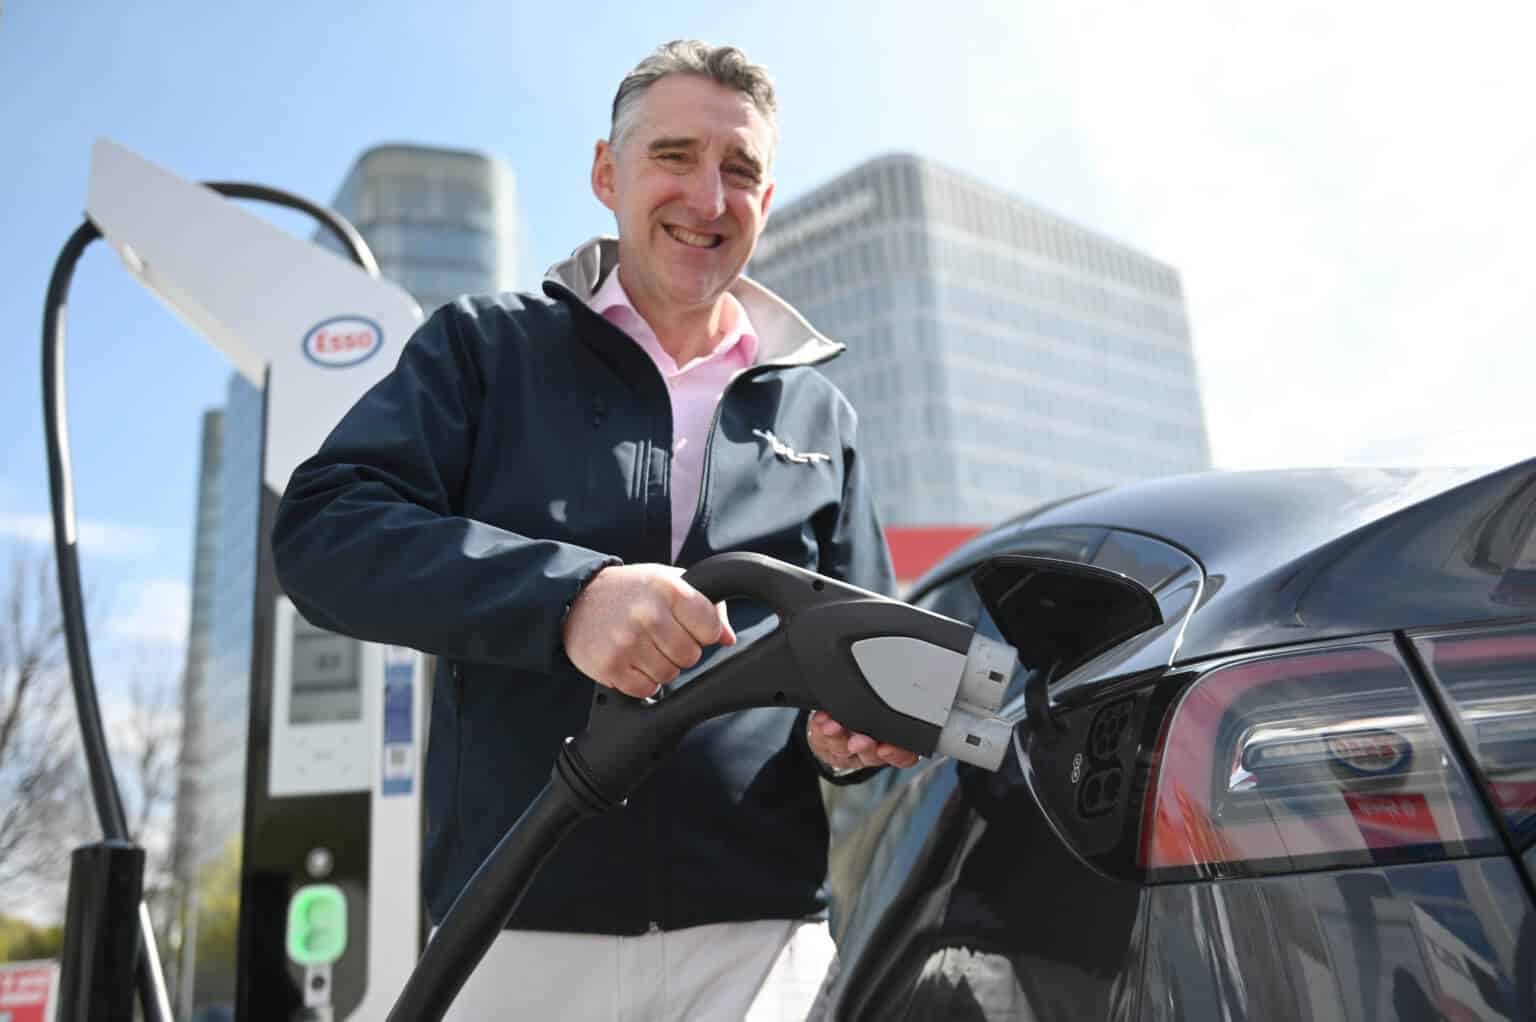 JOLT Energy to Install Thousands of Fast-Charging Stations Across Europe and North America